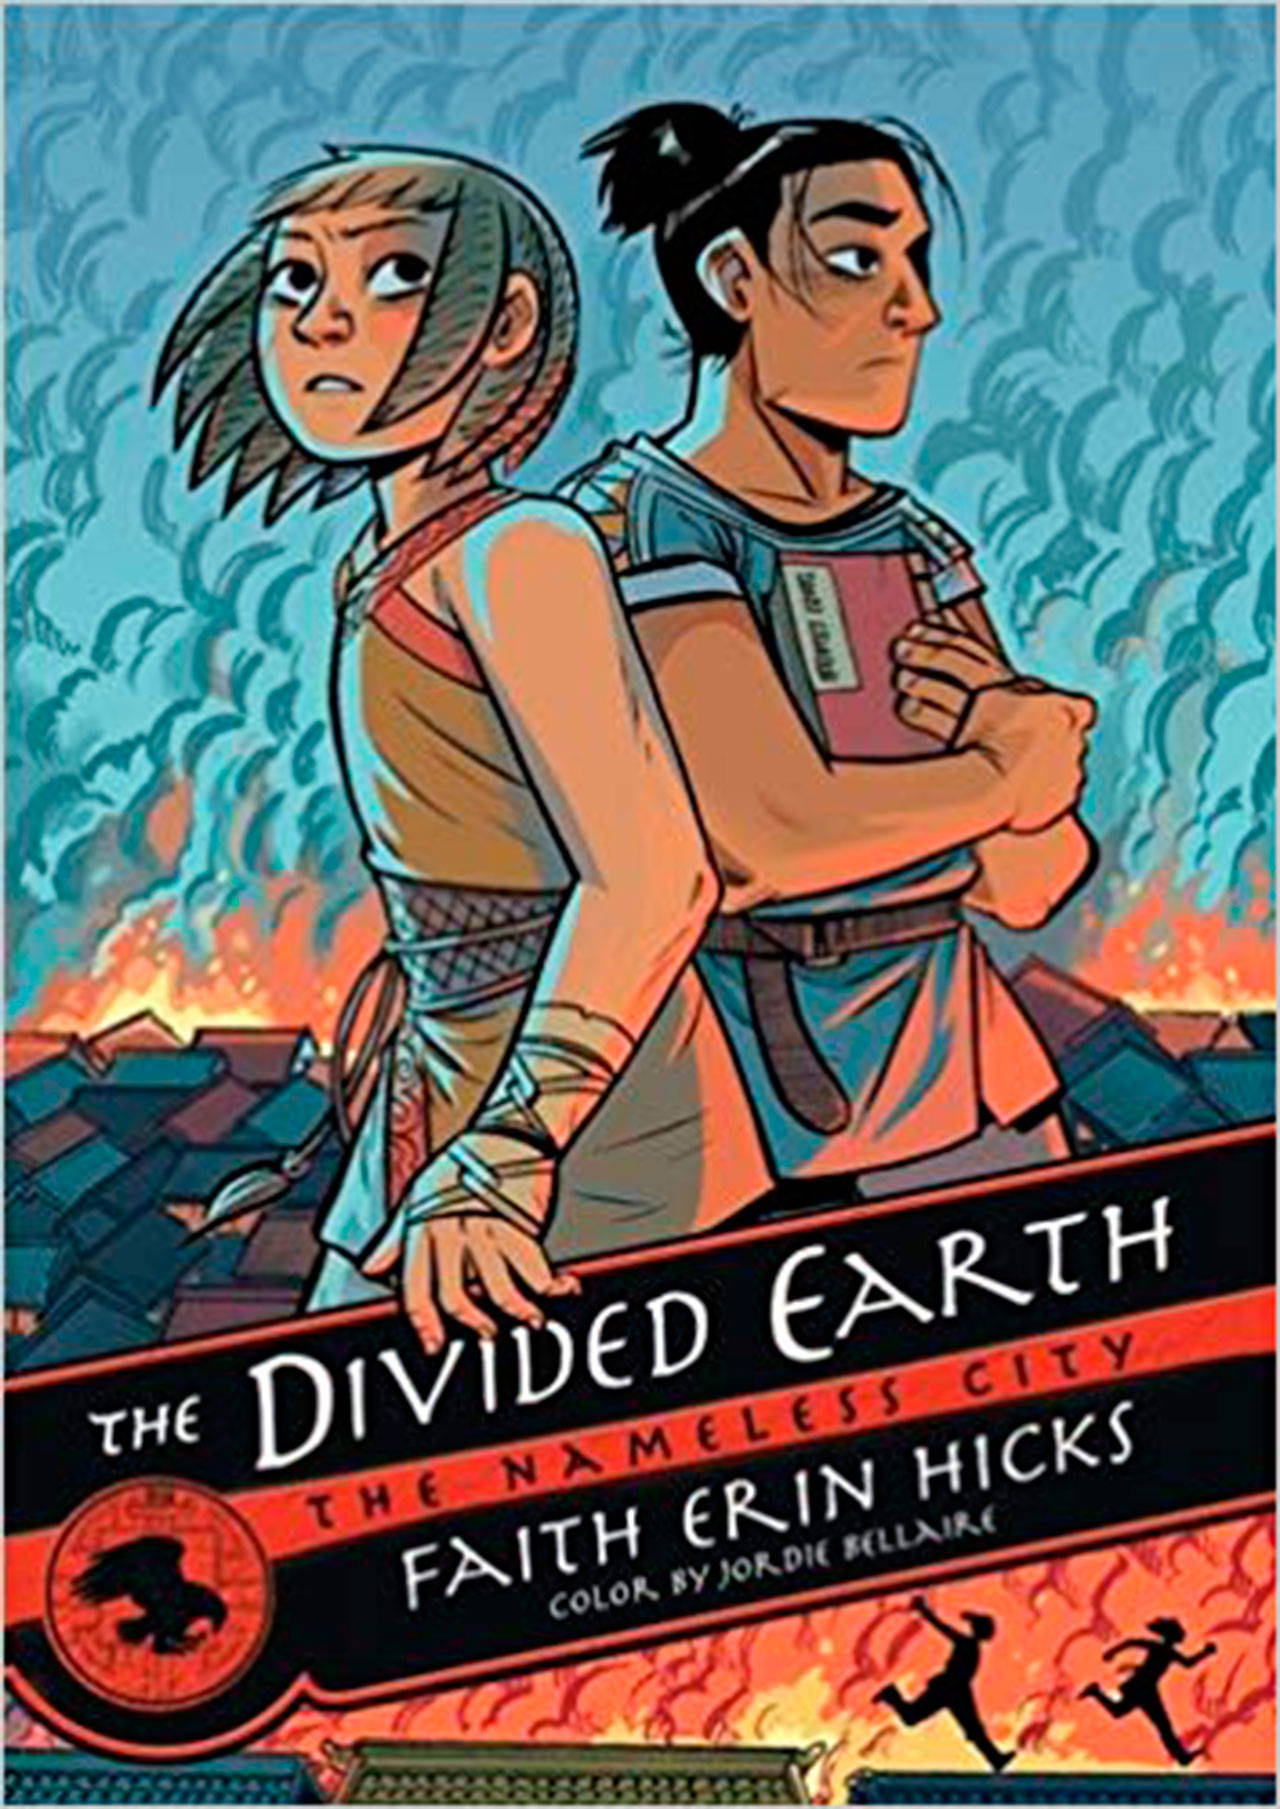 Image courtesy of Eagle Harbor Book Company | Canadian author/illustrator Faith Erin Hicks will visit Eagle Harbor Book Company at 5 p.m. Thursday, Sept. 27 to discuss “The Divided Earth,” the final book in the Nameless City trilogy.